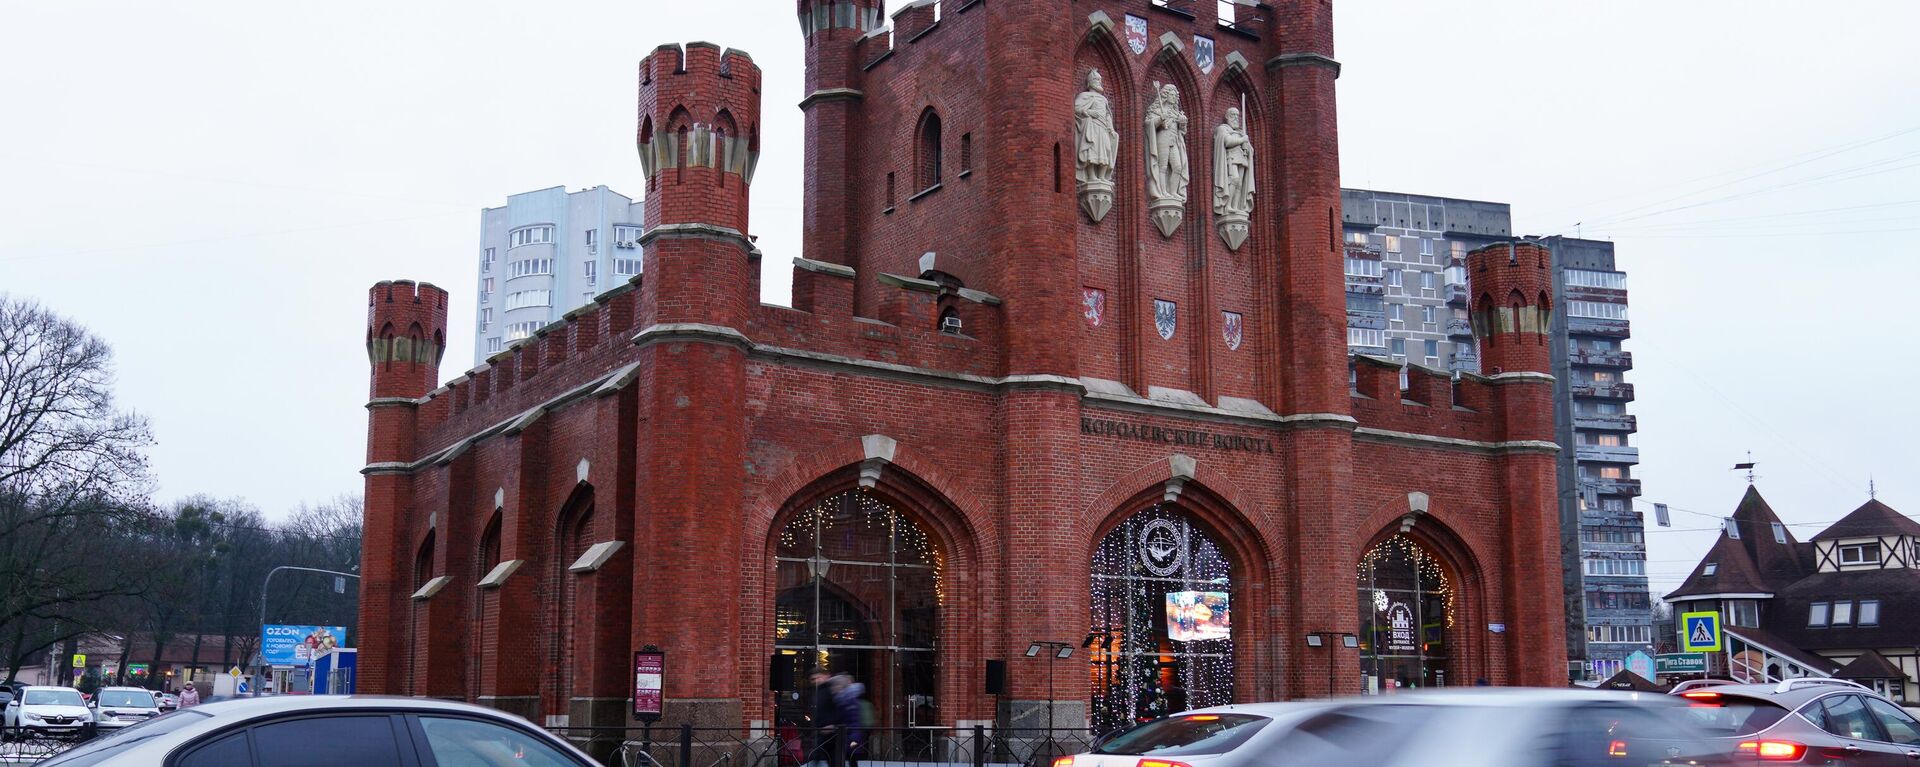 Royal Gate after restoration in Kaliningrad. The Royal Gates are included in the list of objects of cultural heritage of federal significance. - Sputnik International, 1920, 18.06.2022